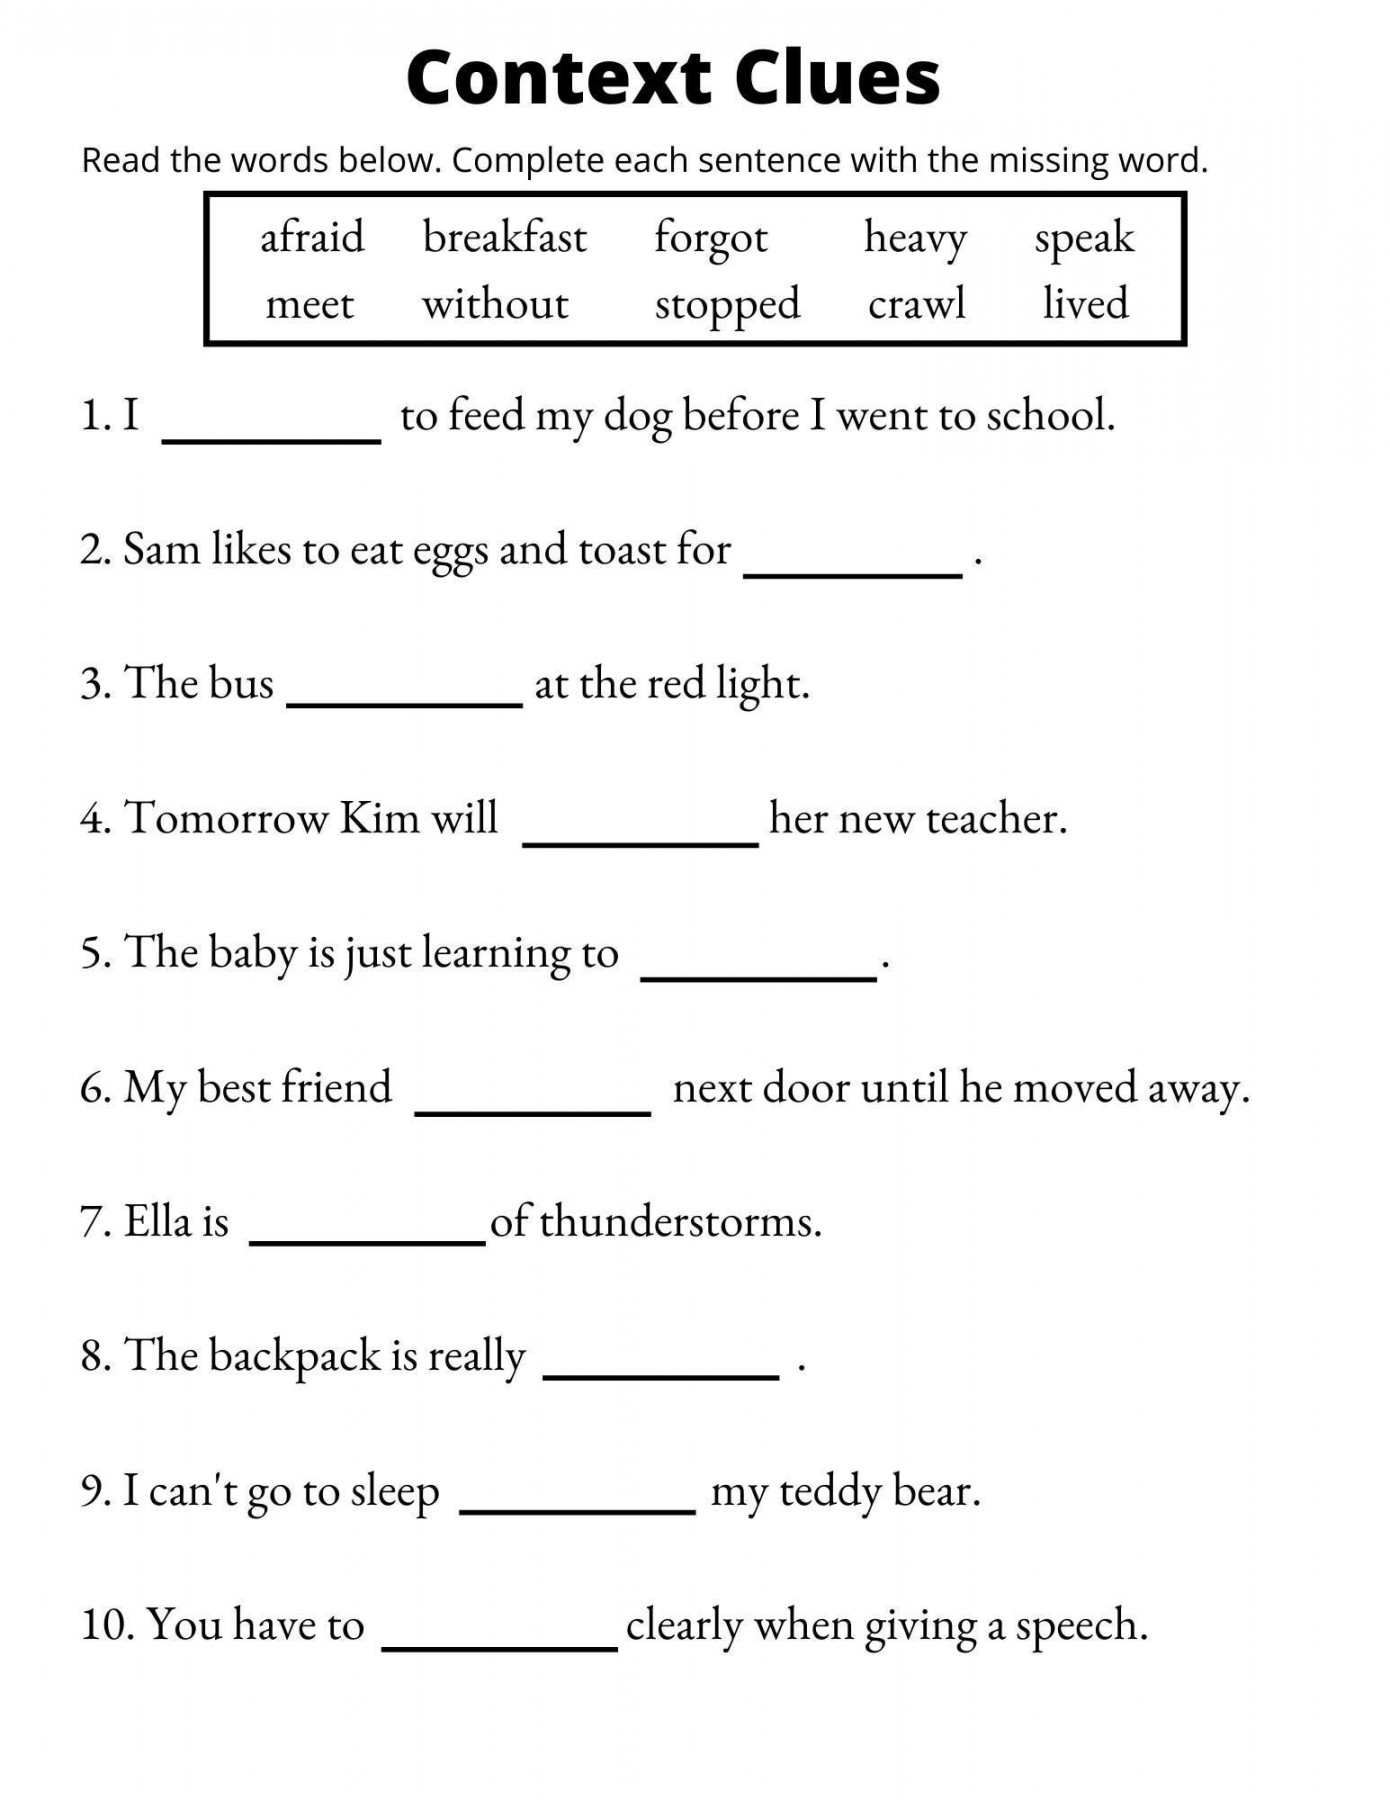 Context Clues Worksheets Vocabulary Printable st - Etsy UK